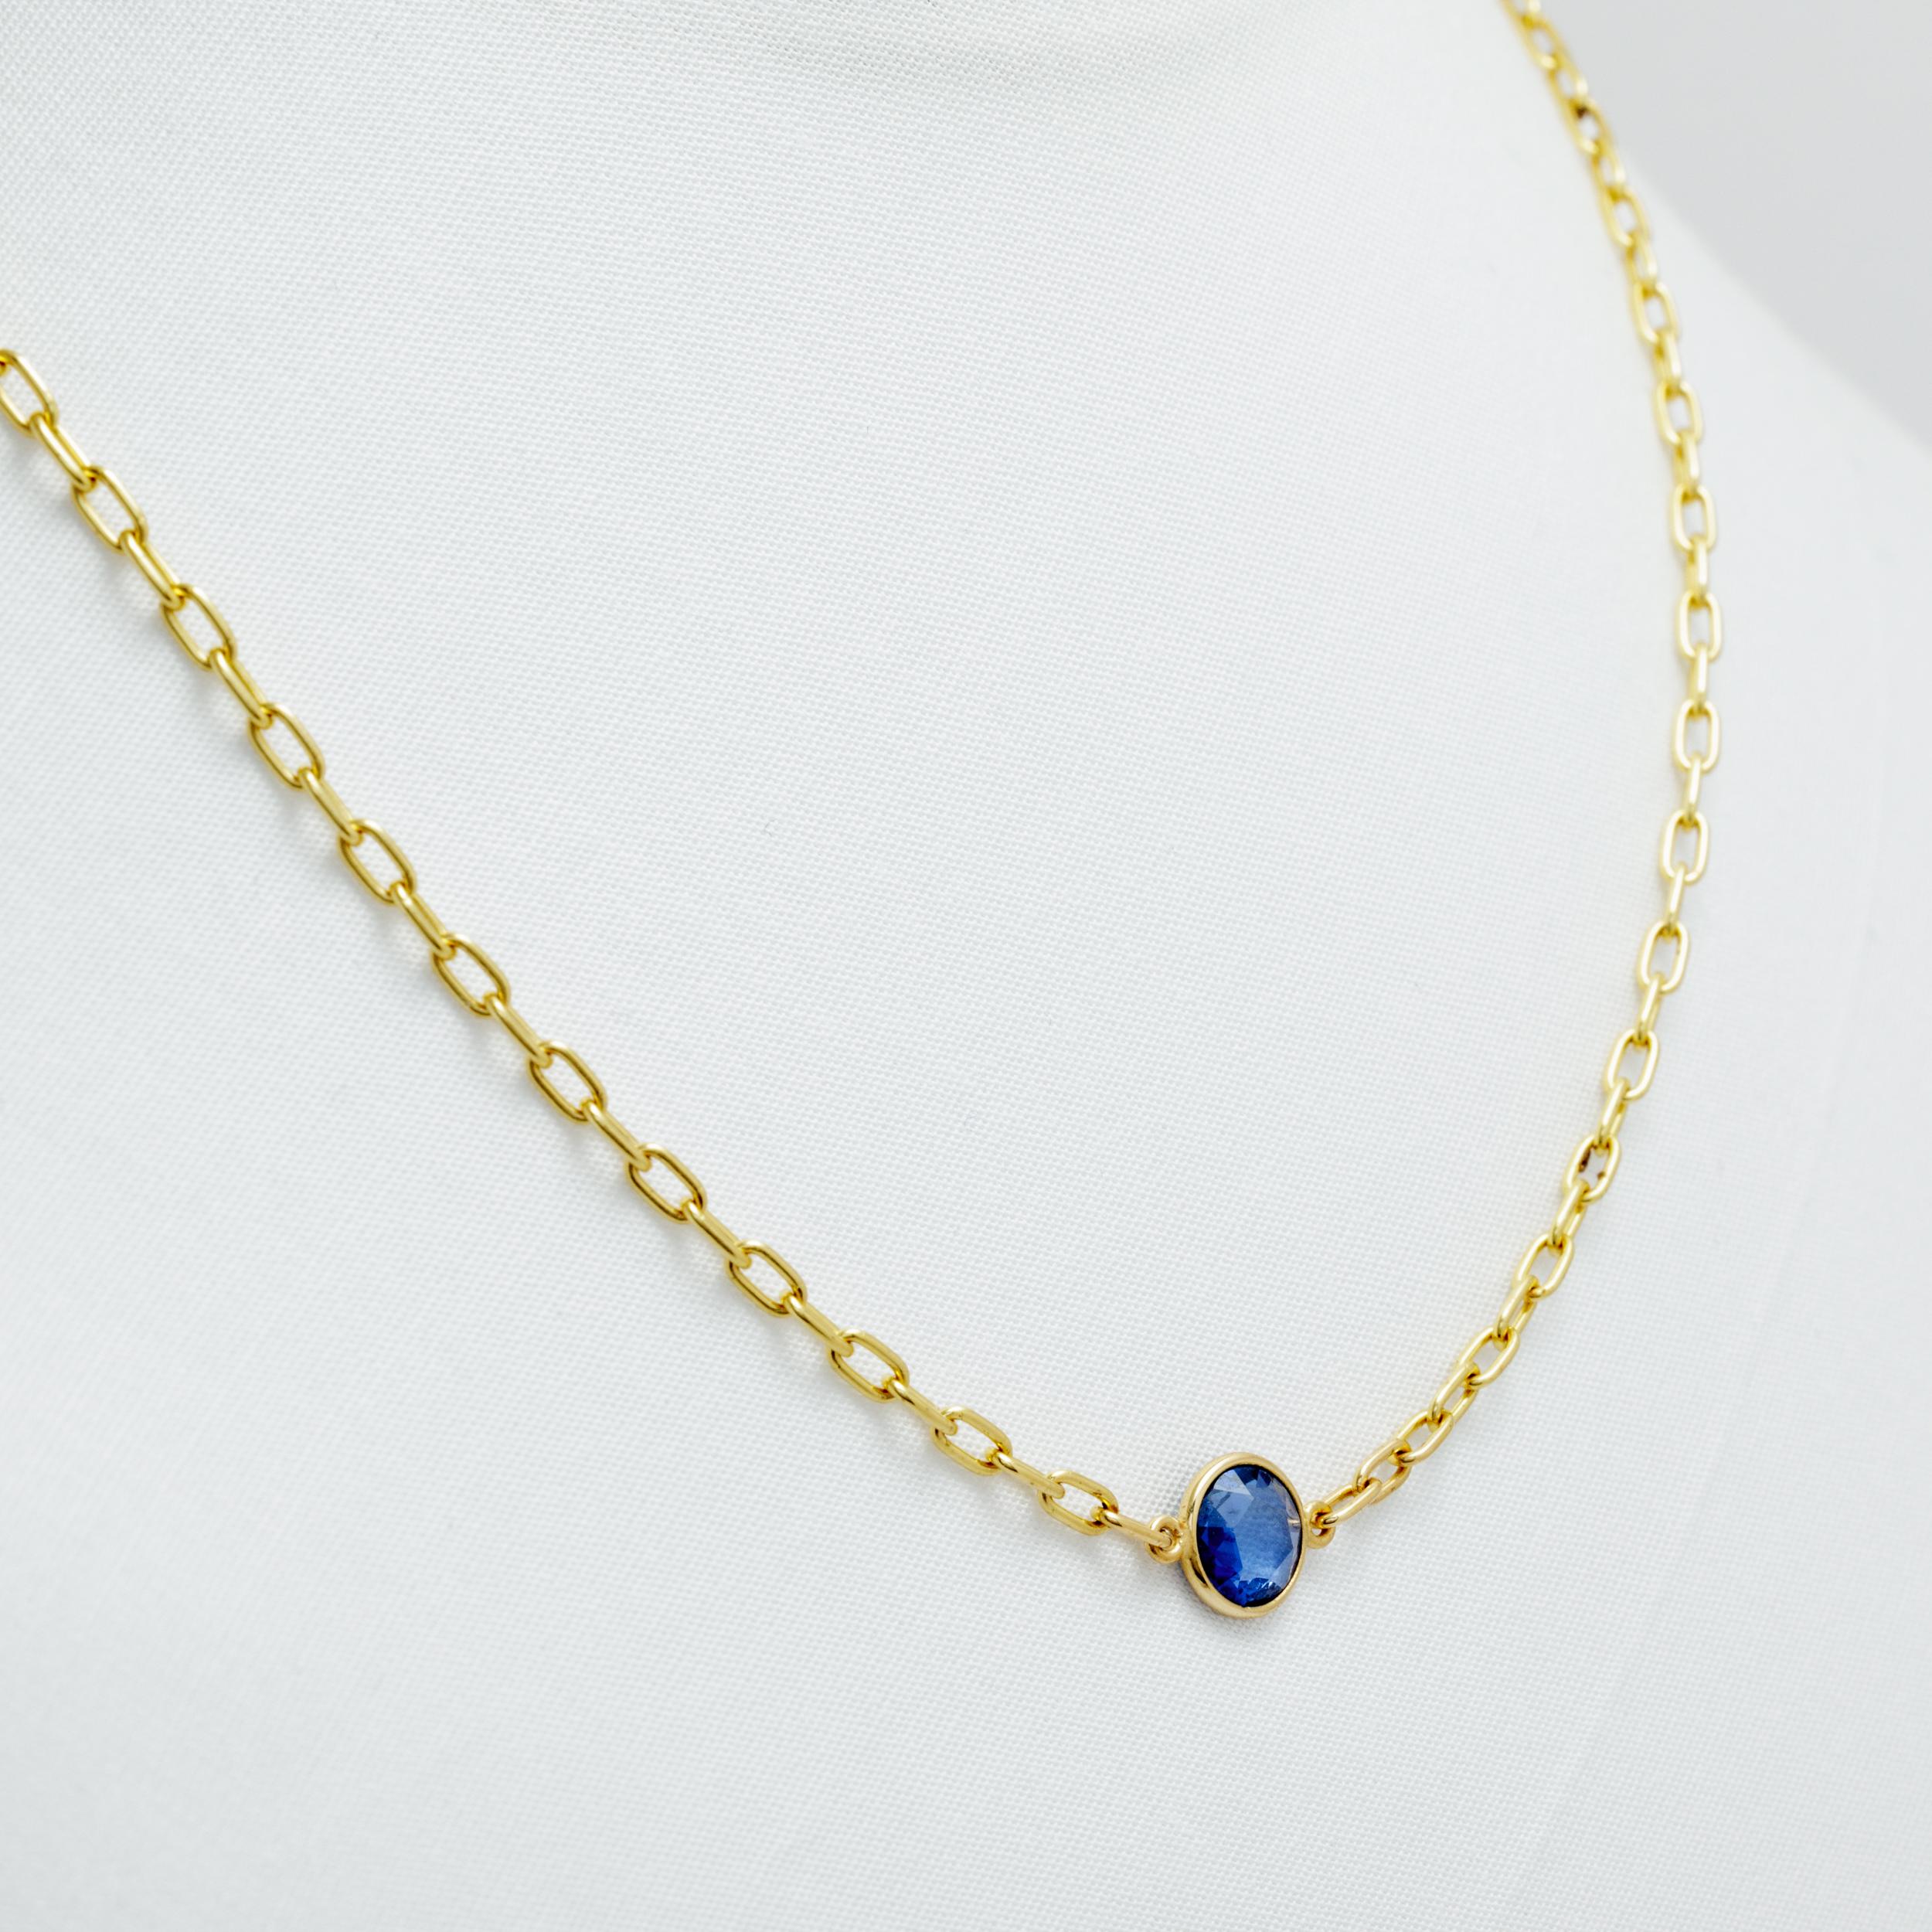 18 Karat Yellow Gold and a 0.90 Carat Ceylon Sapphire Chain Necklace In Excellent Condition For Sale In New York, NY